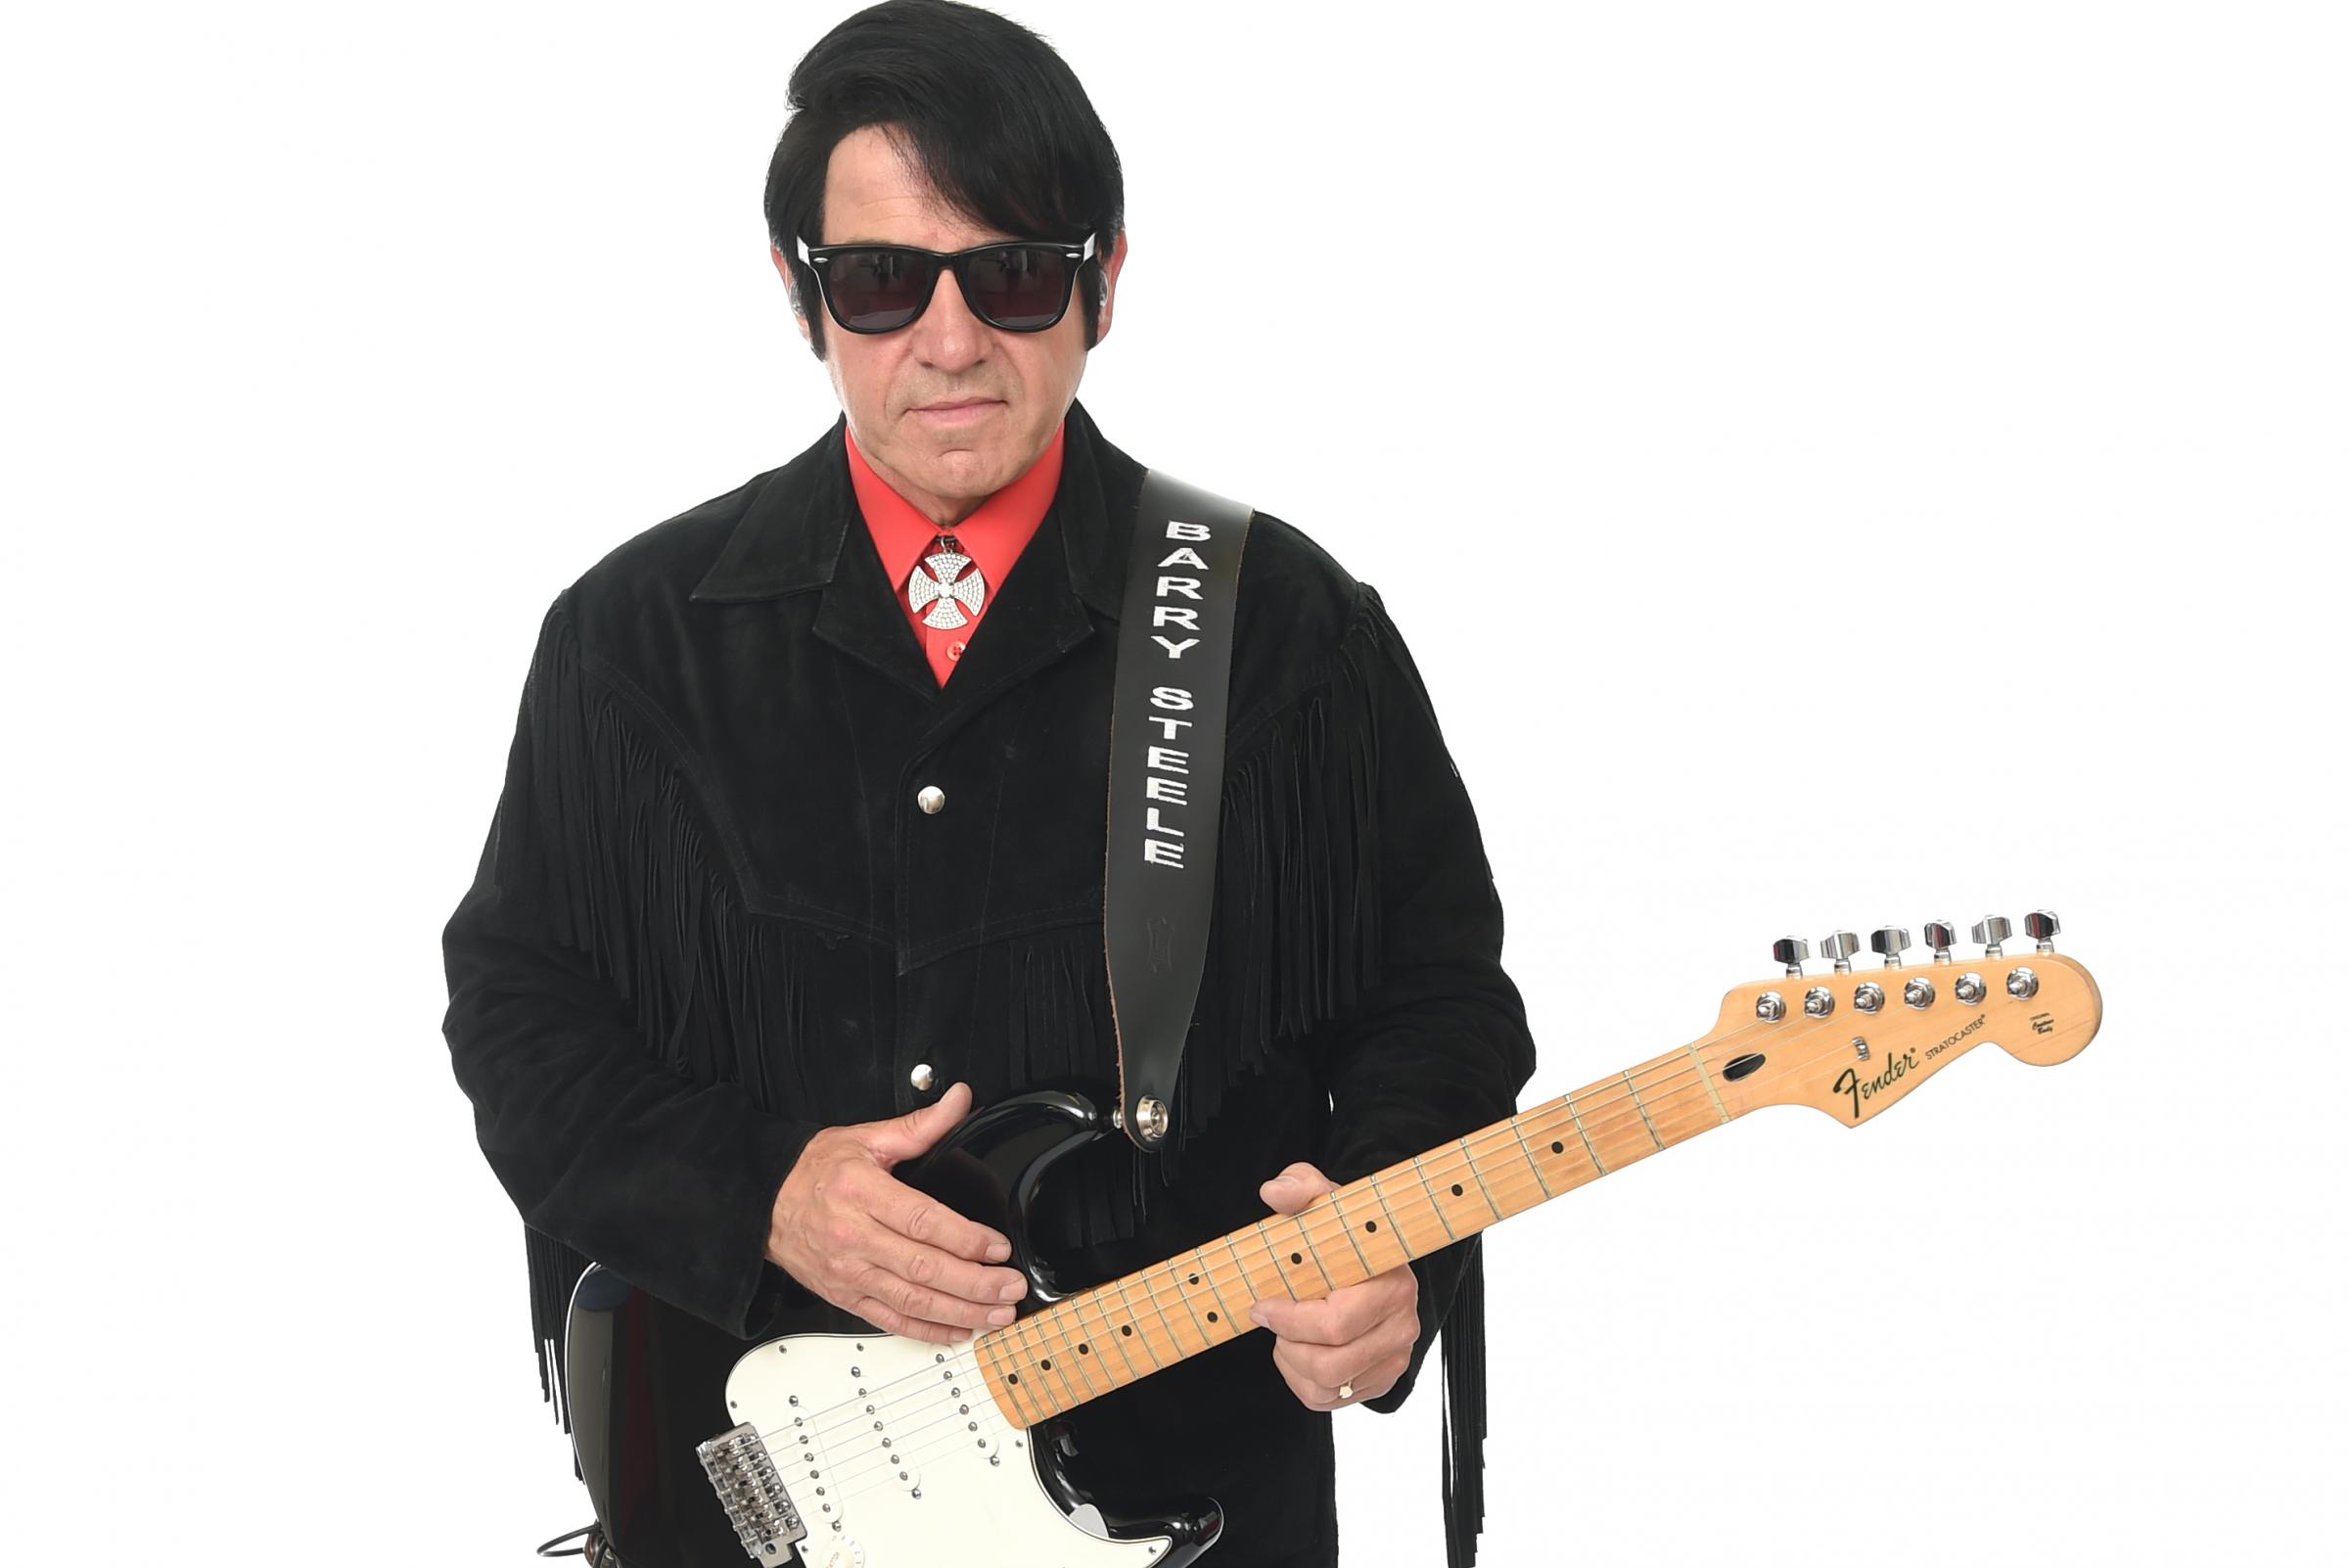 HOT OFF THE STAGE: 'The Roy Orbison Story' at Liverpool Empire